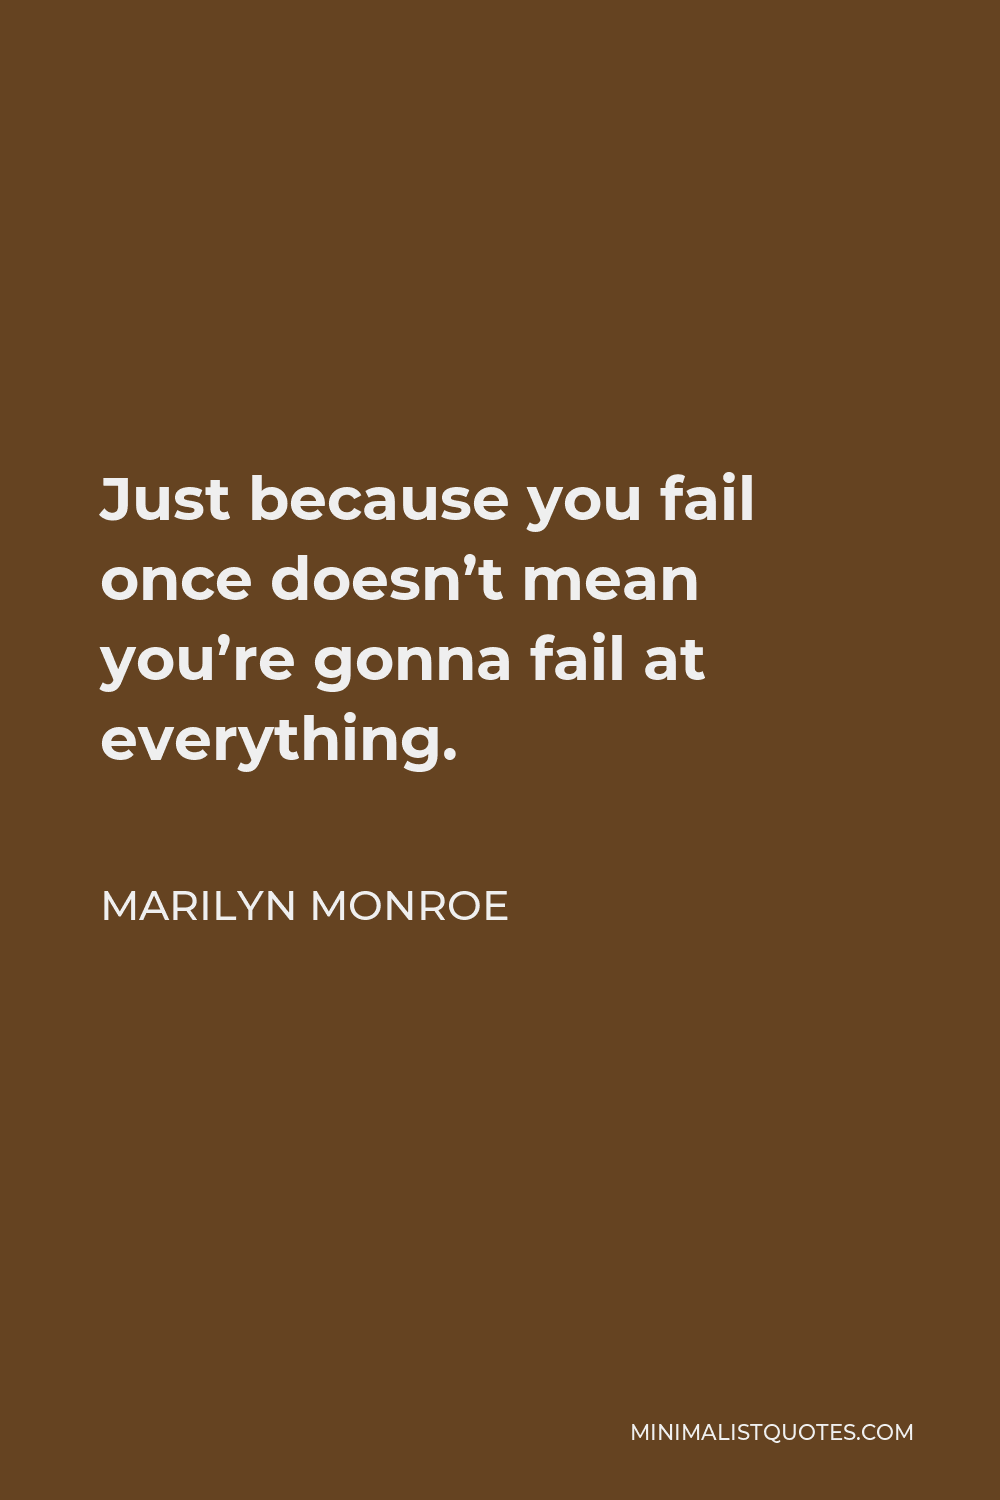 Marilyn Monroe Quote: Just because you fail once doesn't mean you're ...